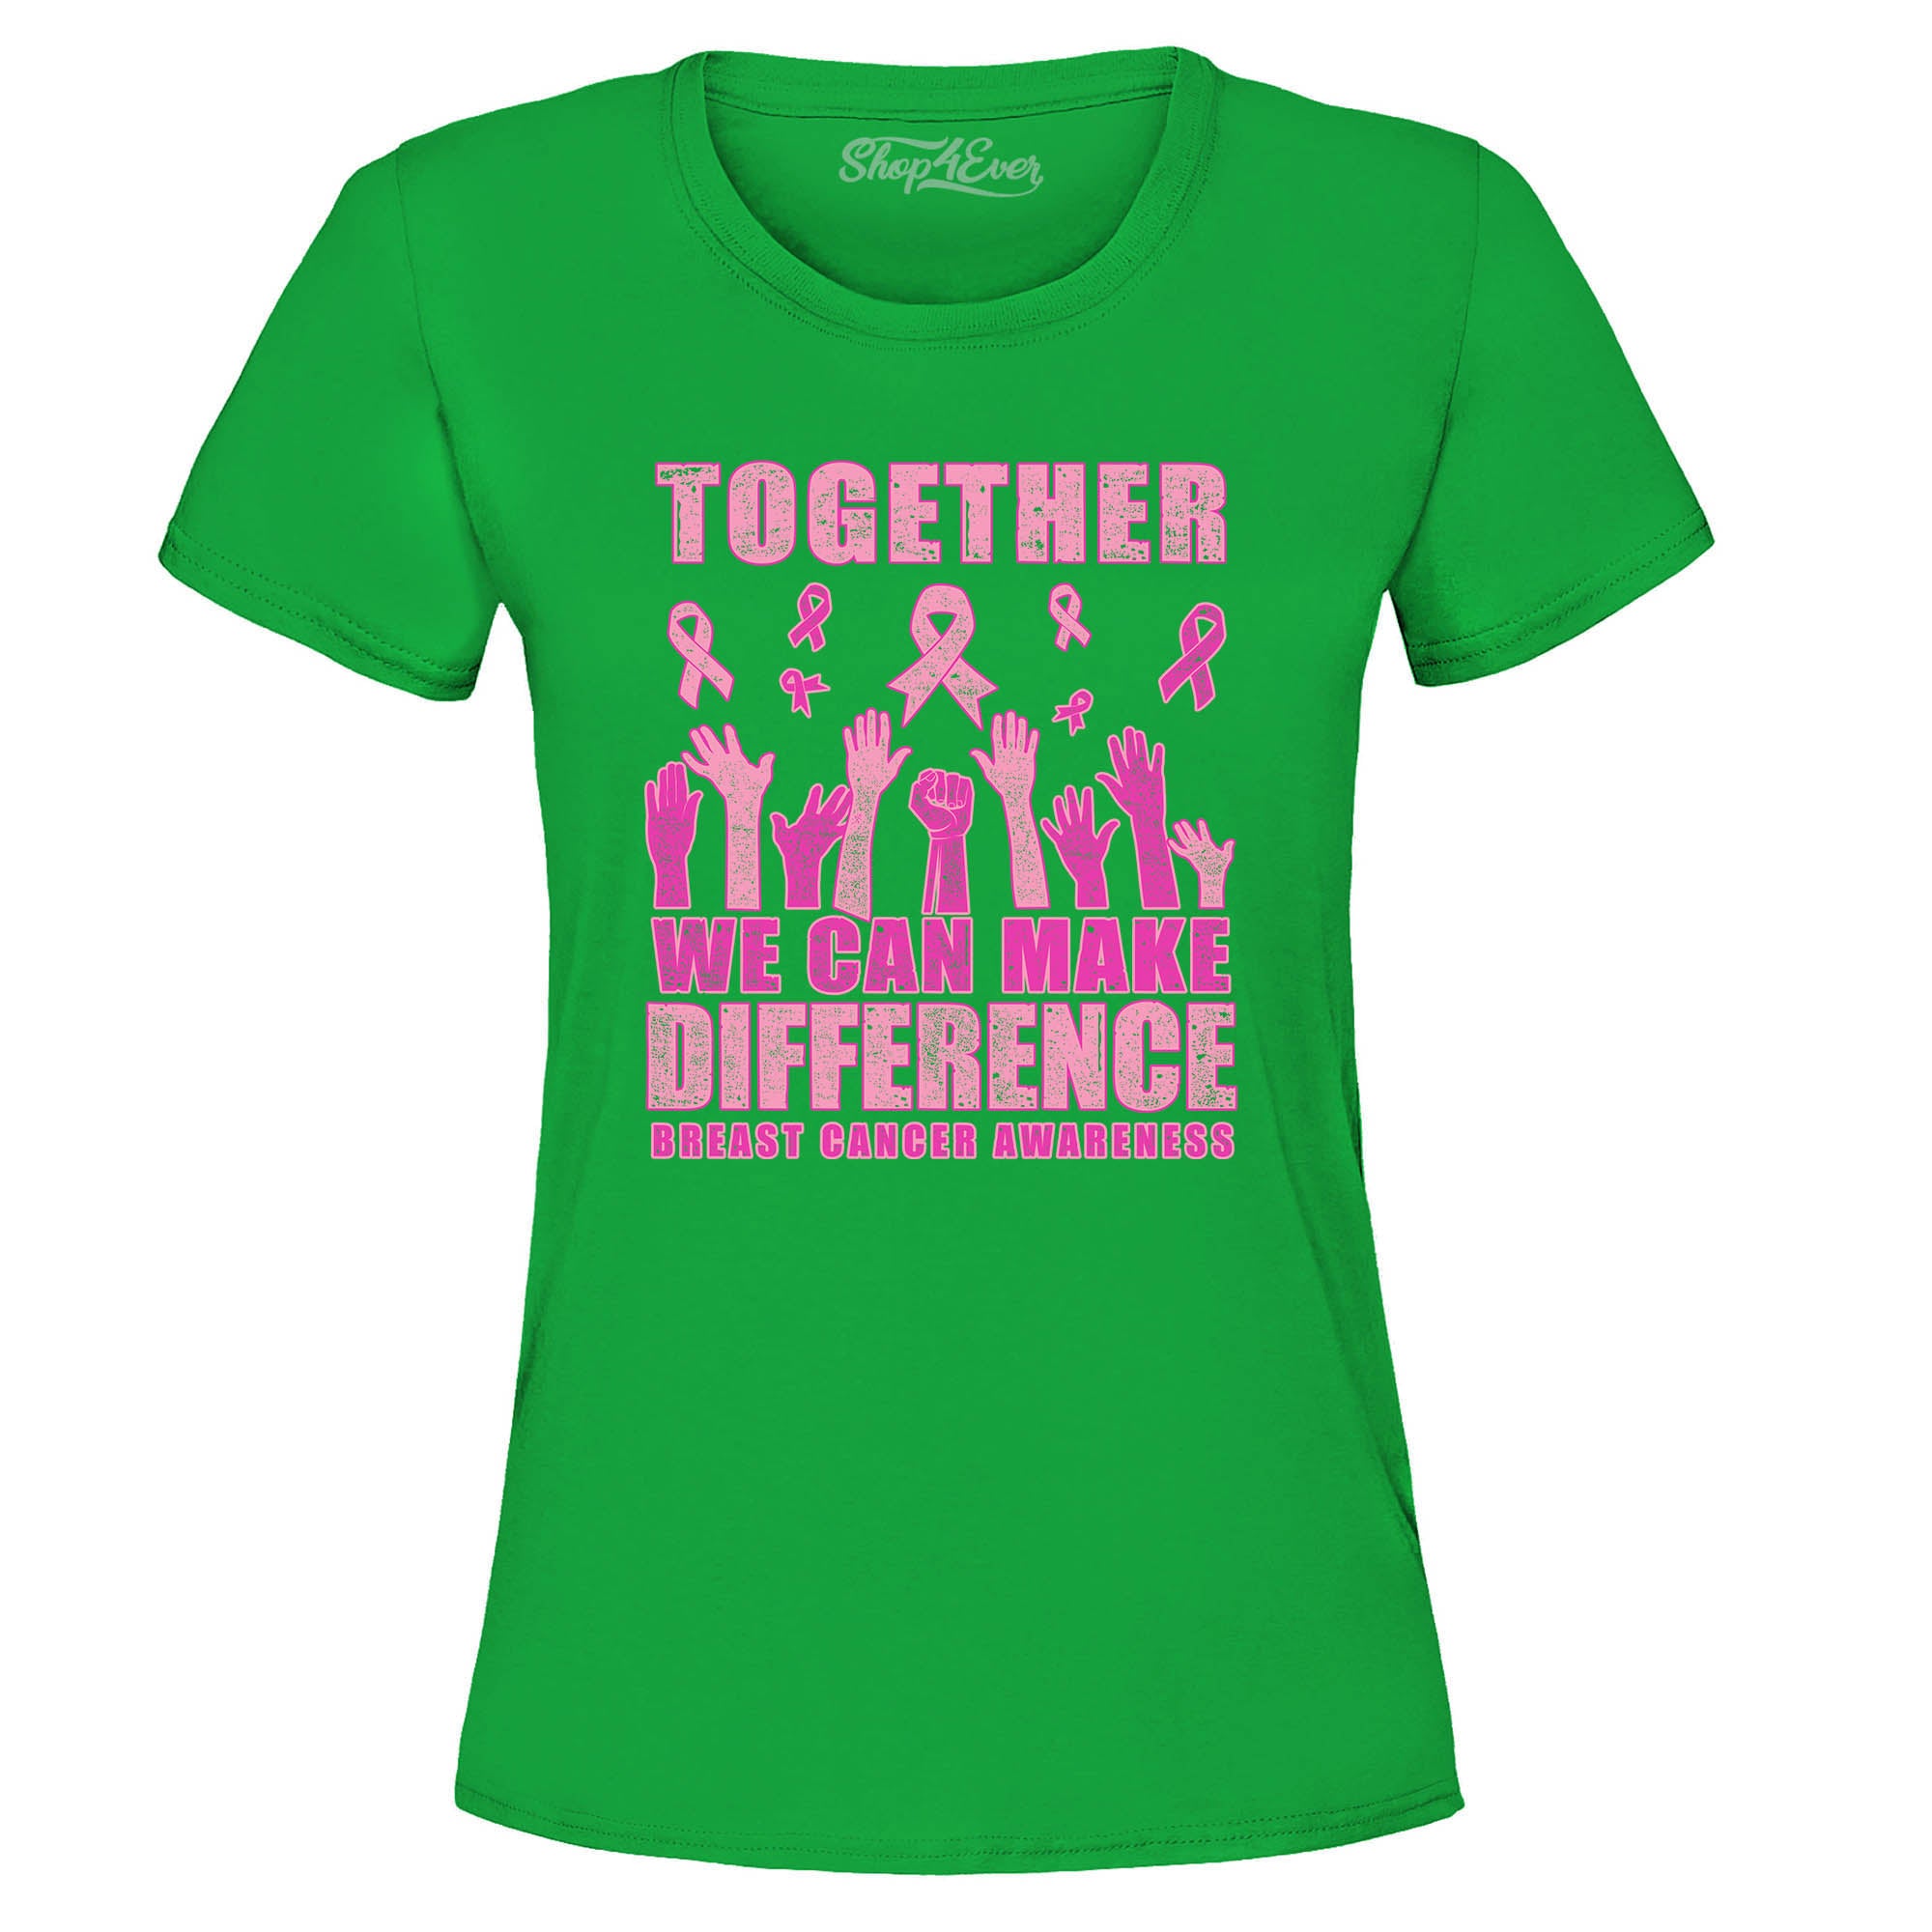 Together We Can Make A Difference Breast Cancer Awareness Women's T-Shirt Inspirational Tee